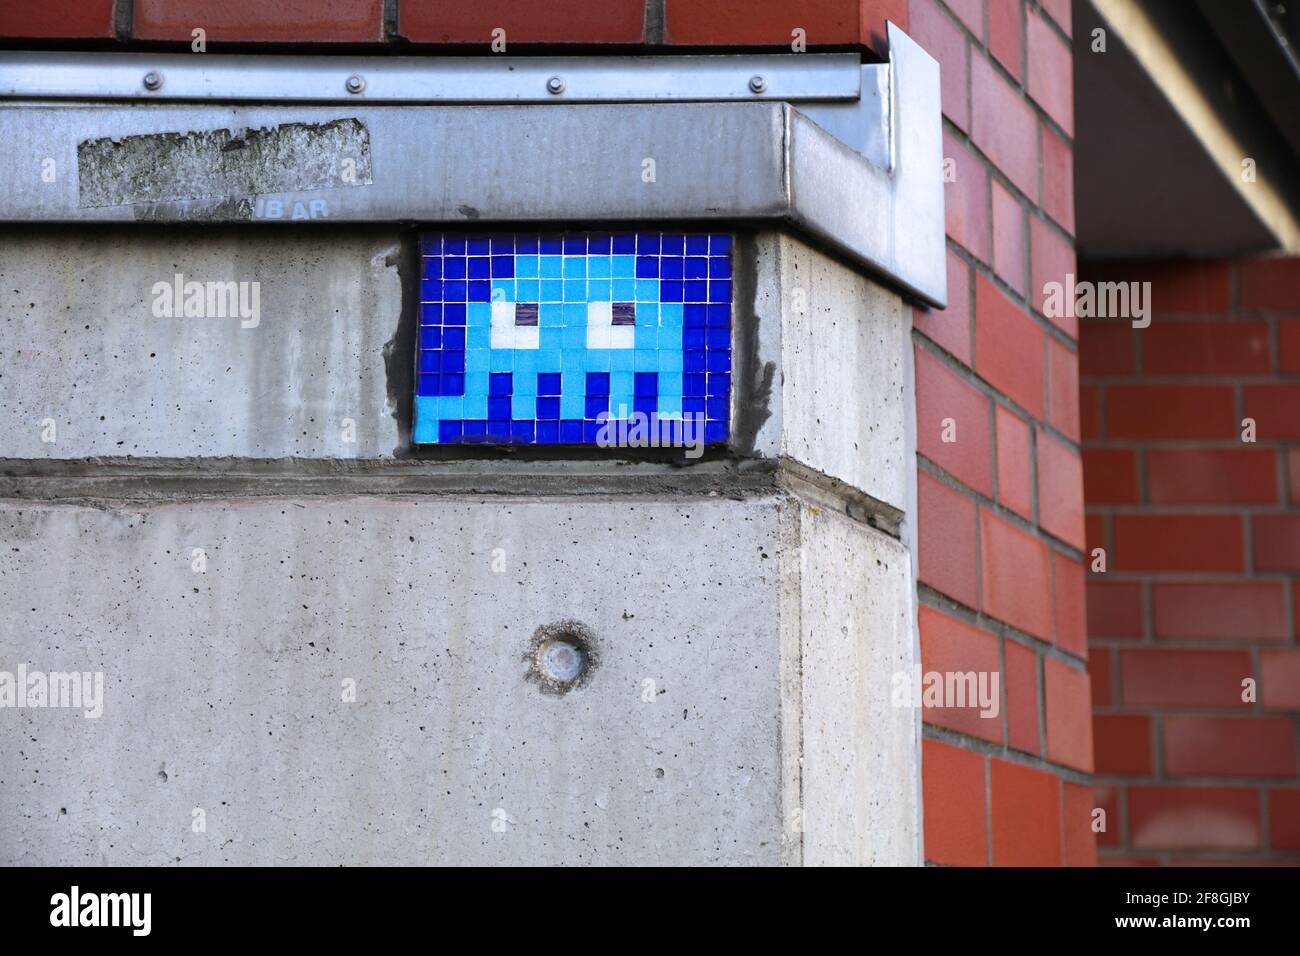 DUISBURG, GERMANY - SEPTEMBER 18, 2020: Space Invaders pixel art mosaic in Duisburg city, Germany. 1970s and 1980s video game pixel art is a popular t Stock Photo